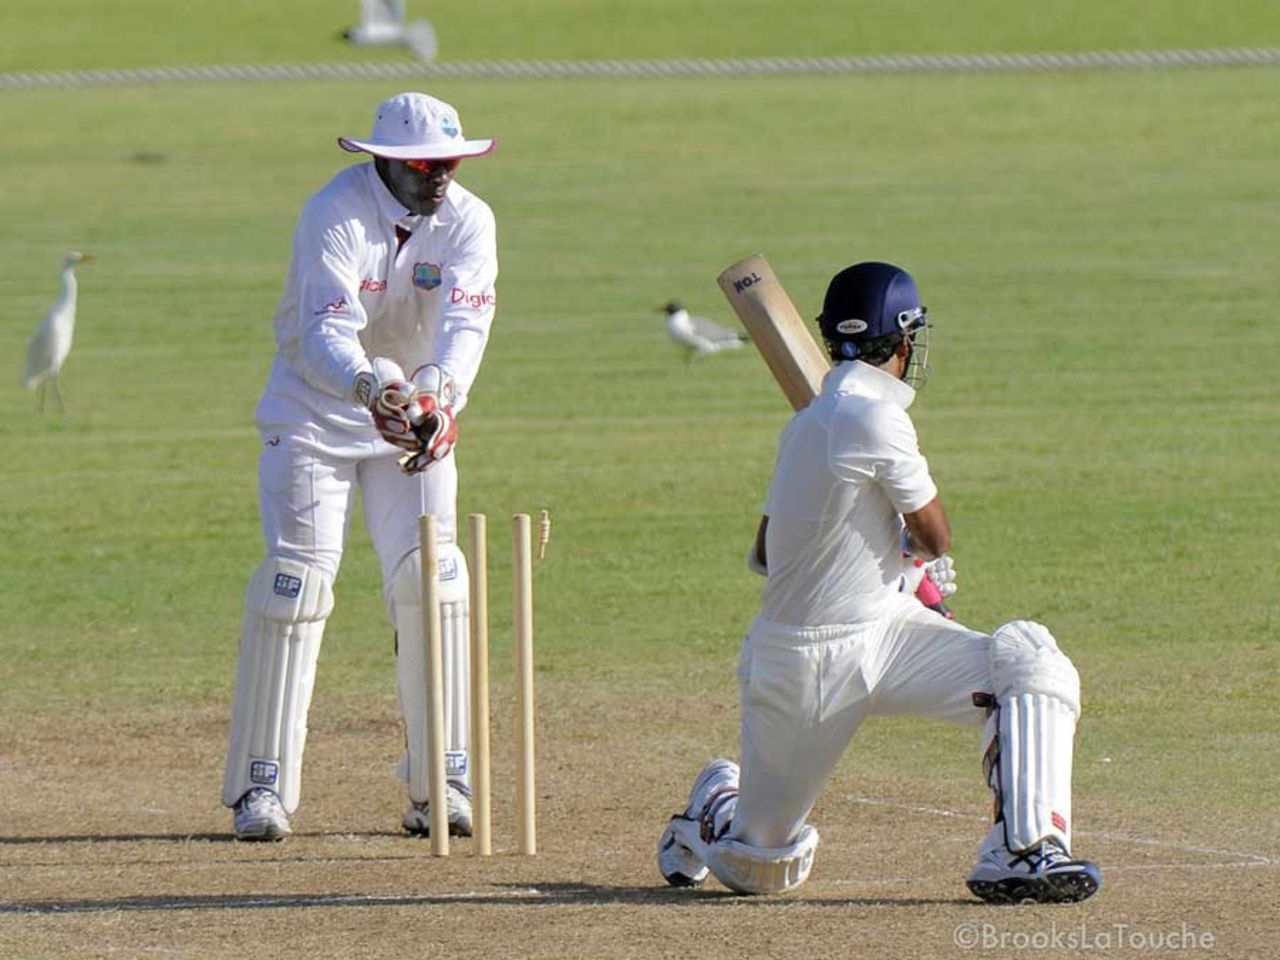 Ashok Dinda is bowled by Veerasammy Permaul, West Indies A v India A, 2nd unofficial Test, St Vincent, 2nd day, June 10, 2012